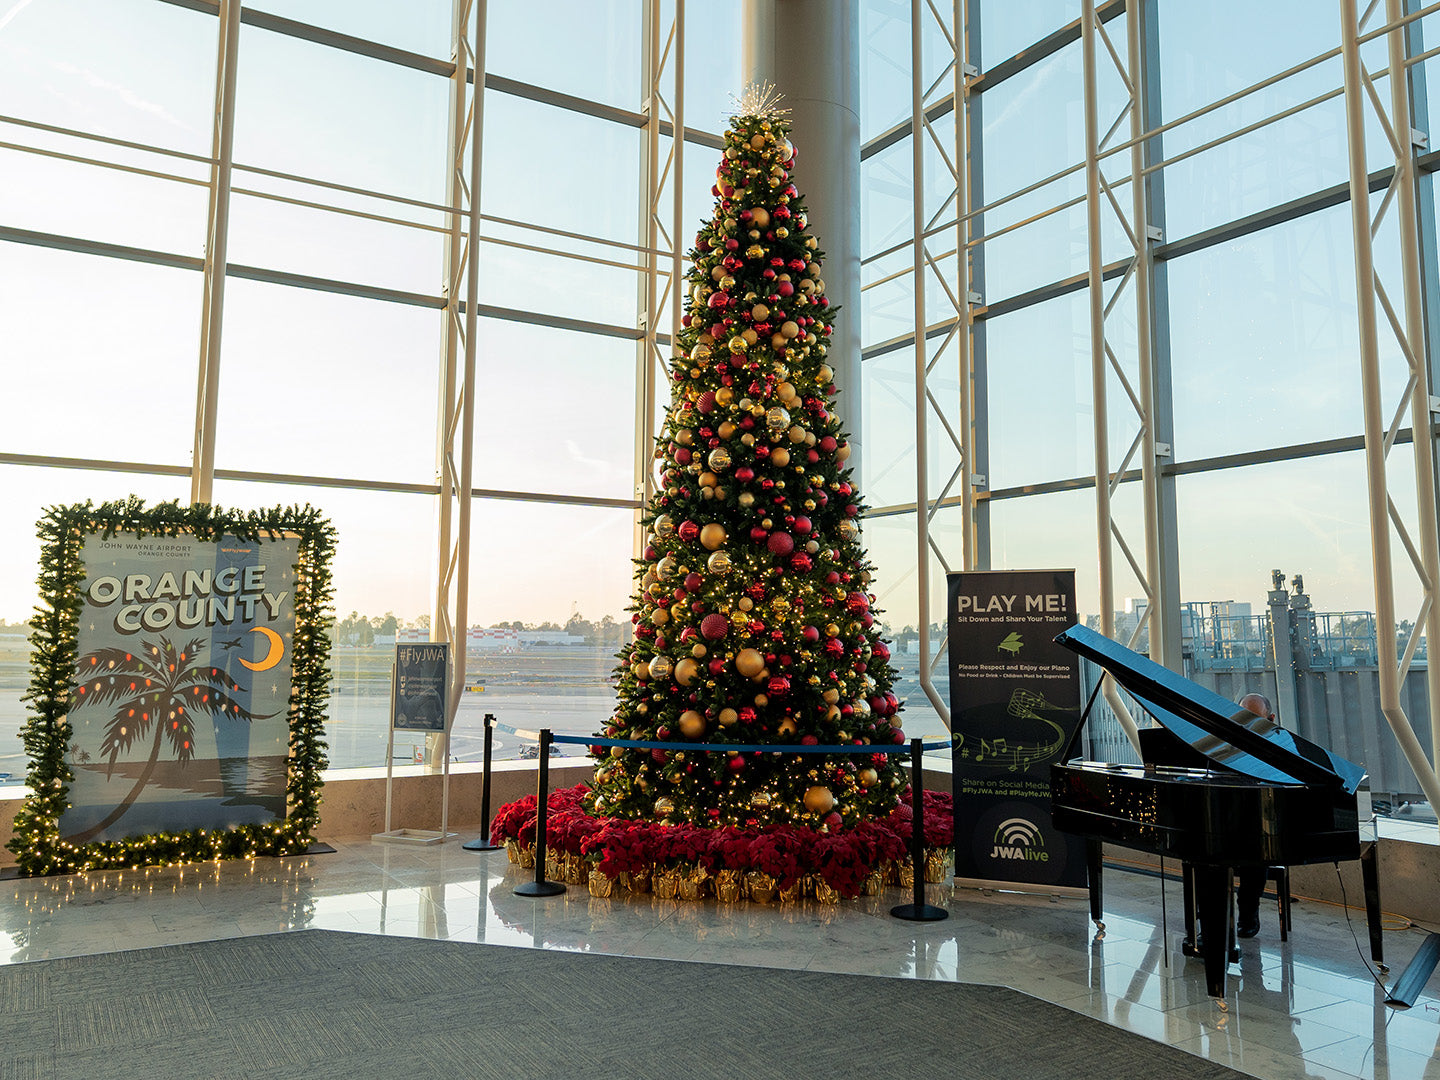 A Christmas tree adorned with vibrant poinsettias stands amidst the hustle and bustle of an airport terminal.